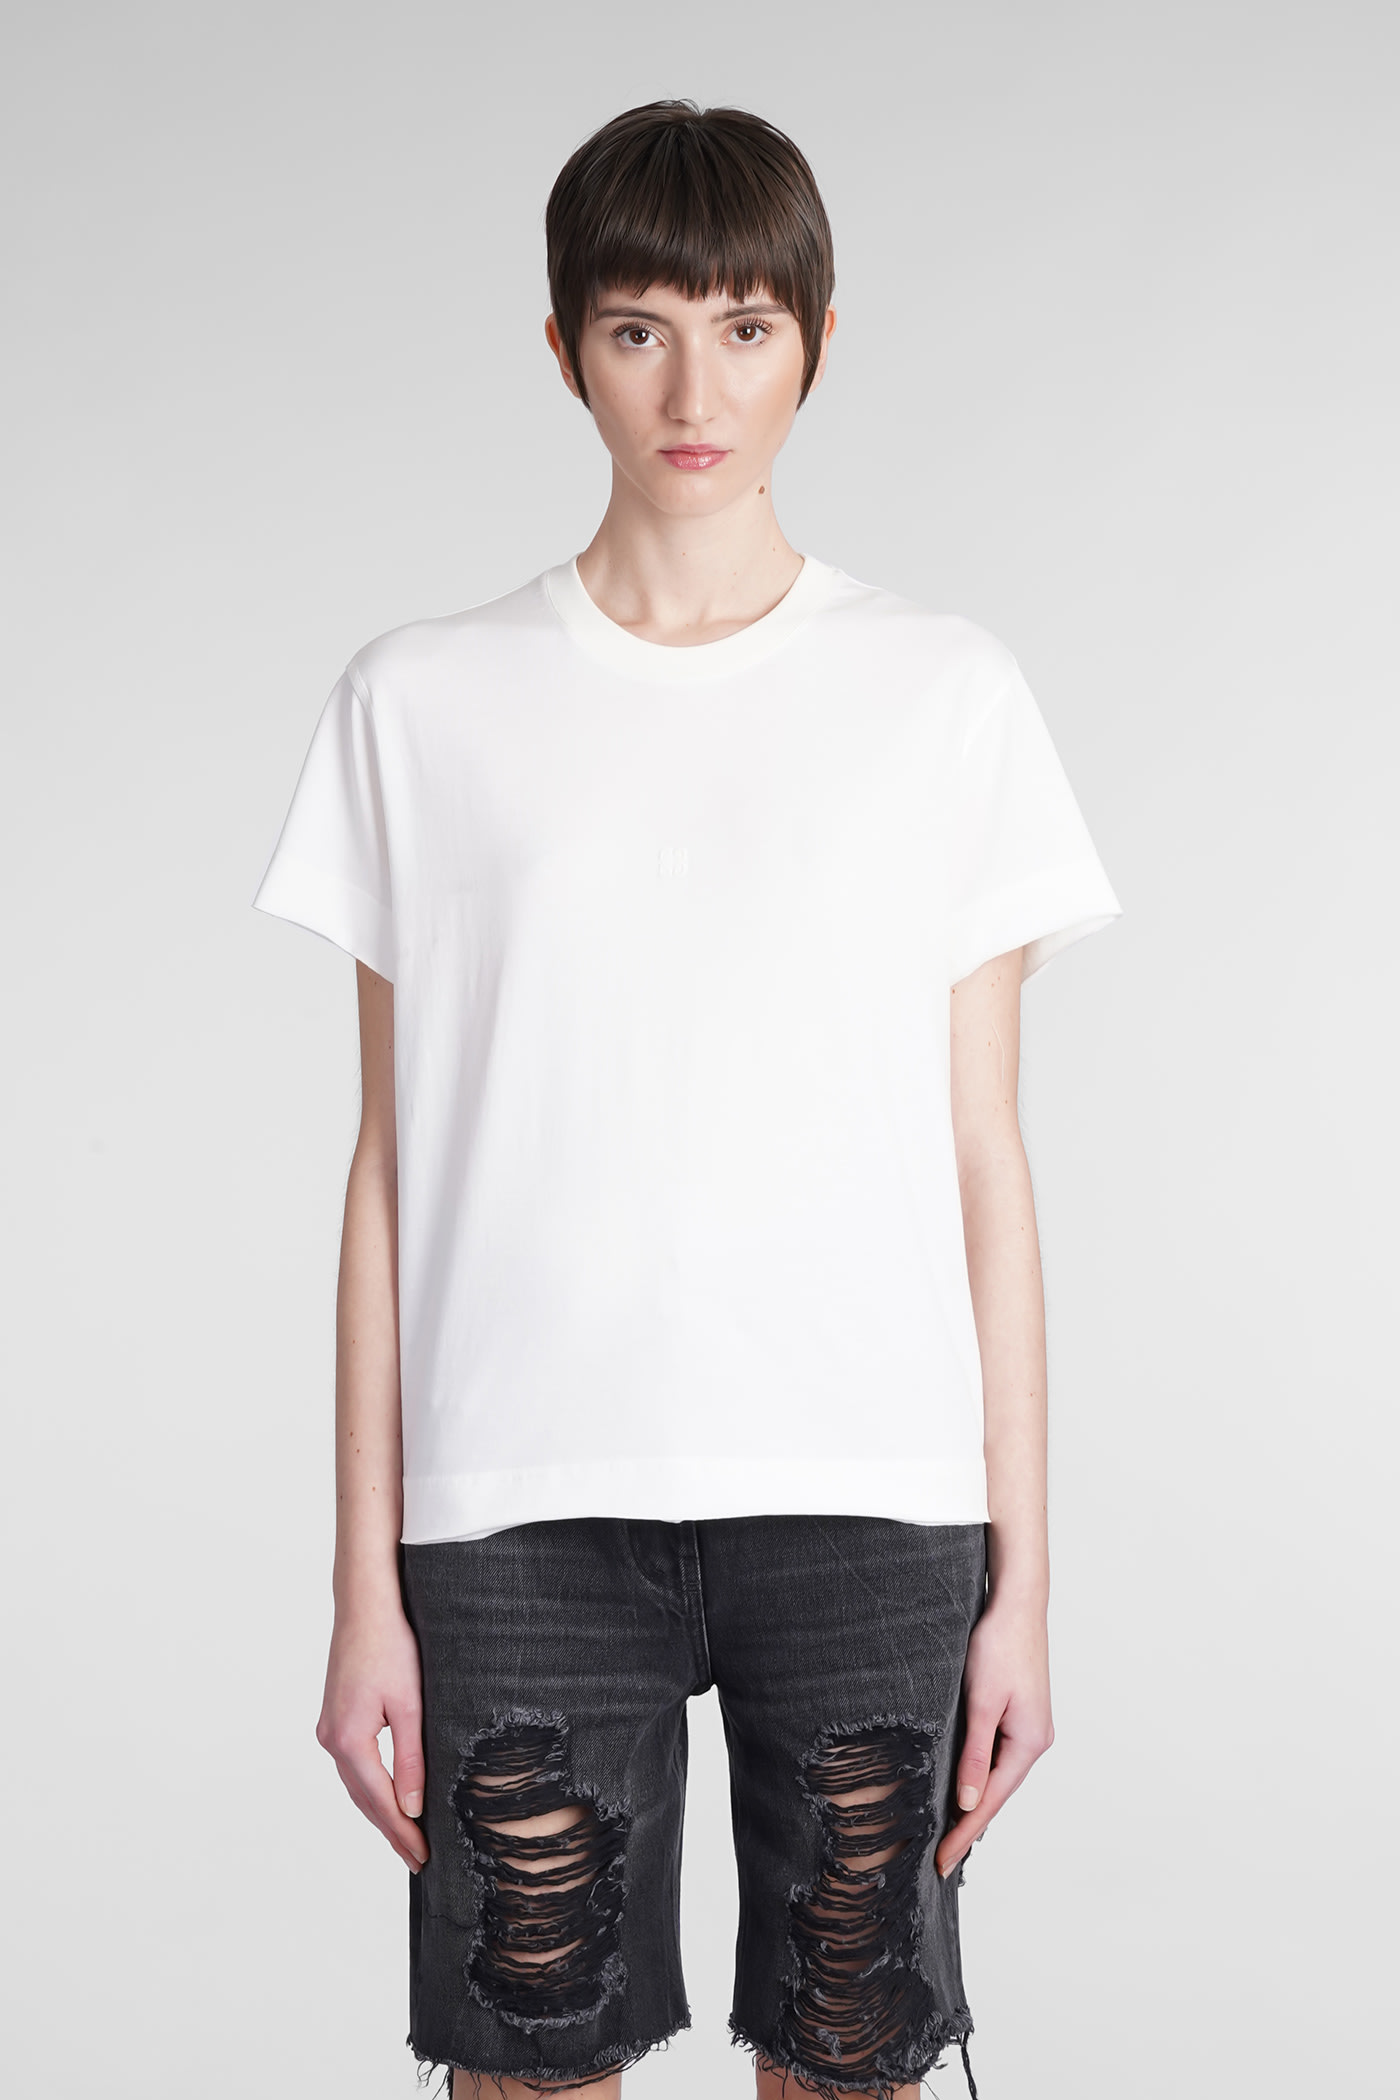 GIVENCHY T-SHIRT IN BEIGE COTTON